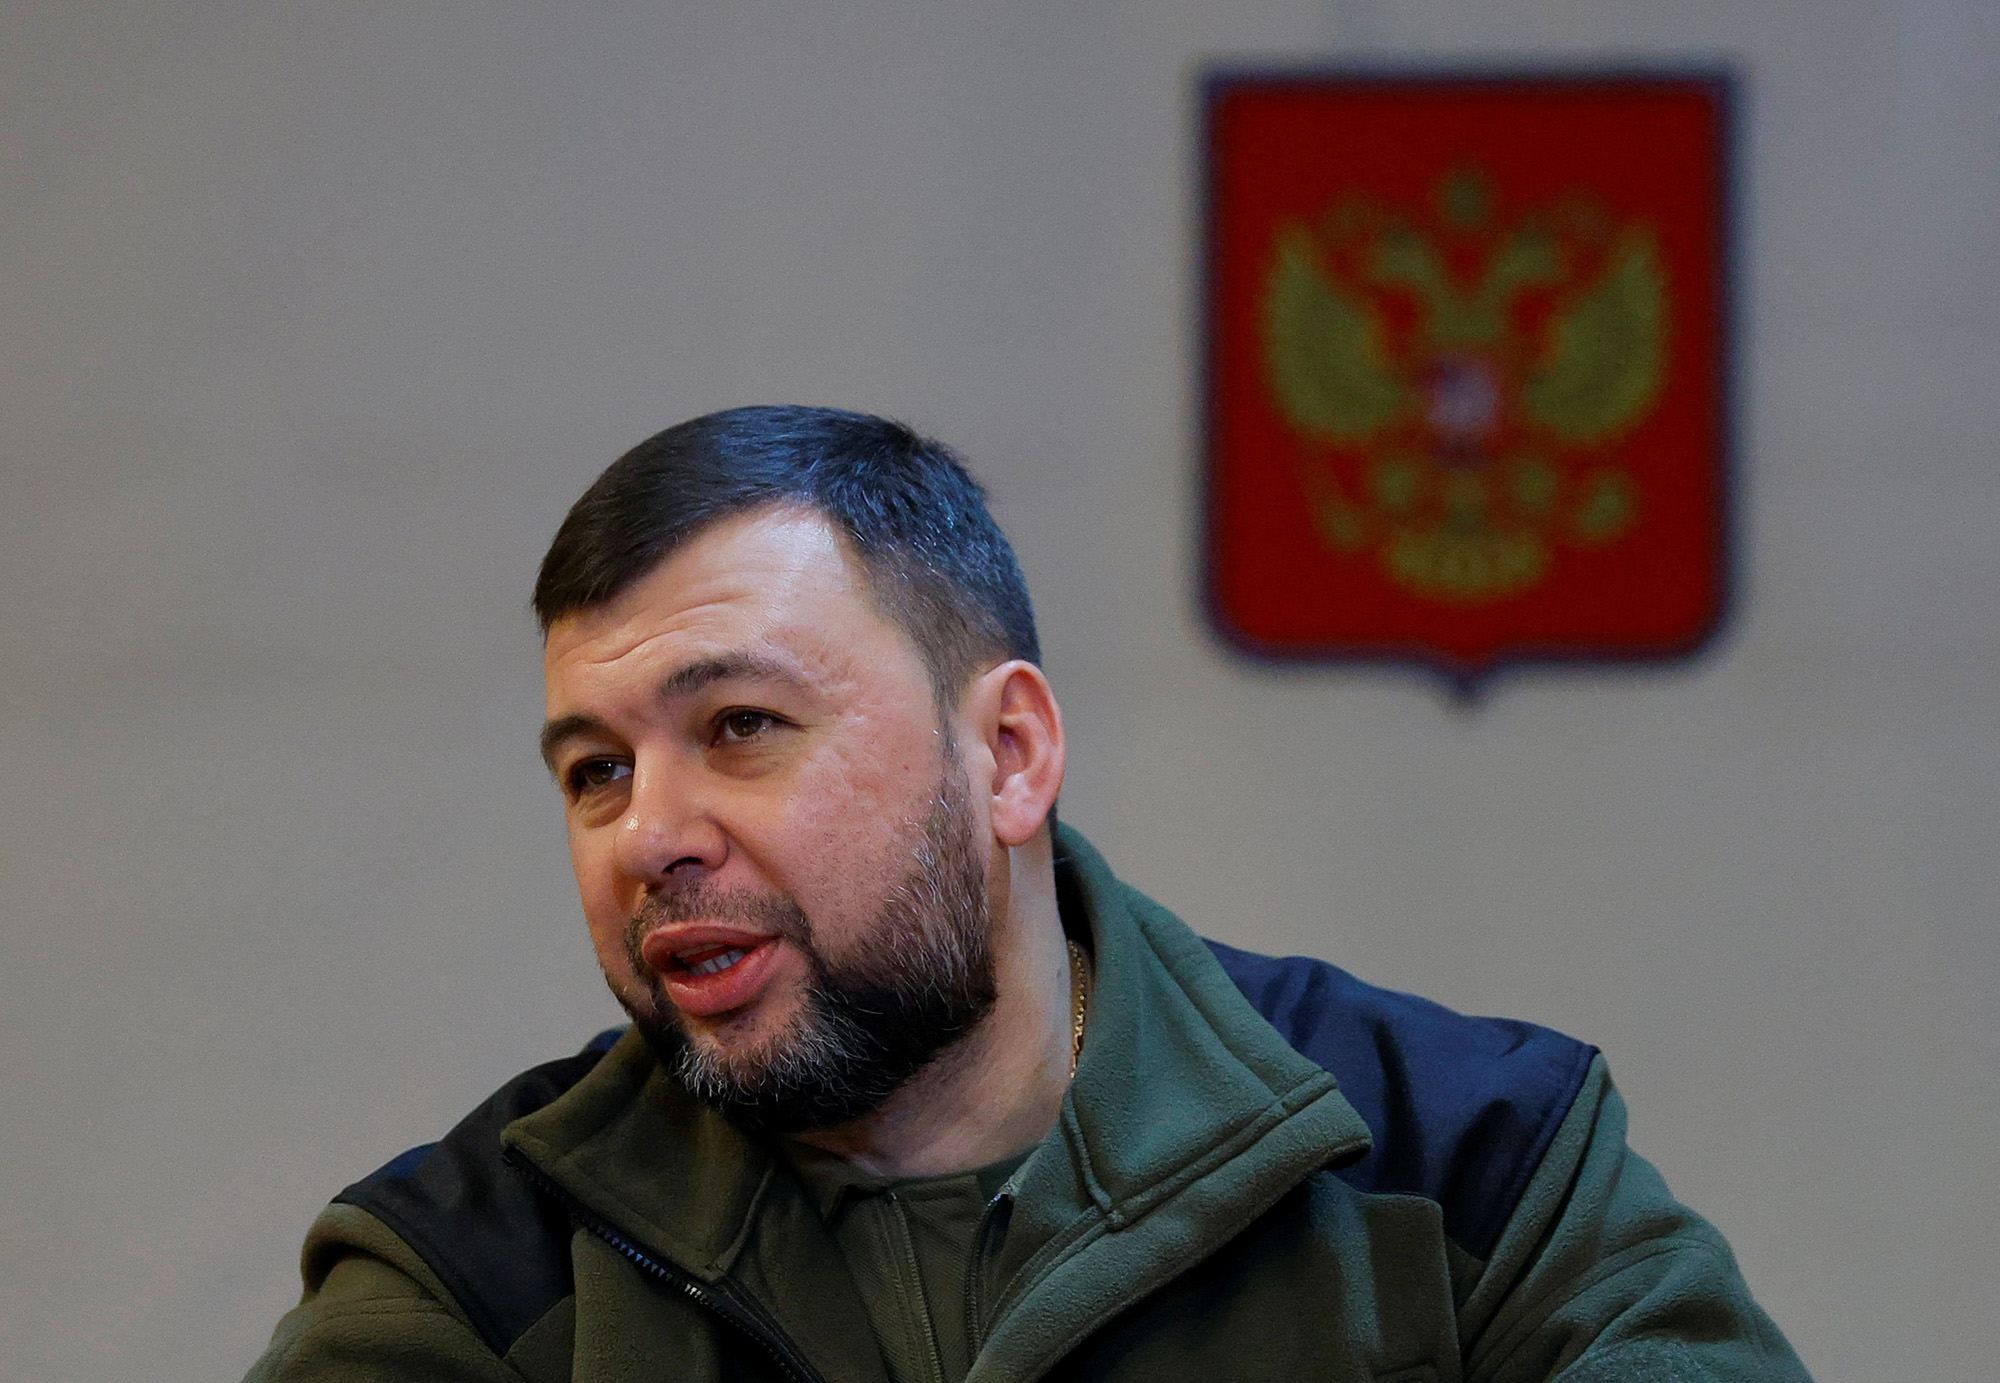 Denis Pushilin attends a meeting with servicemen from Russian-controlled parts of Donetsk and Luhansk regions in Donetsk, Ukraine, on November 6.